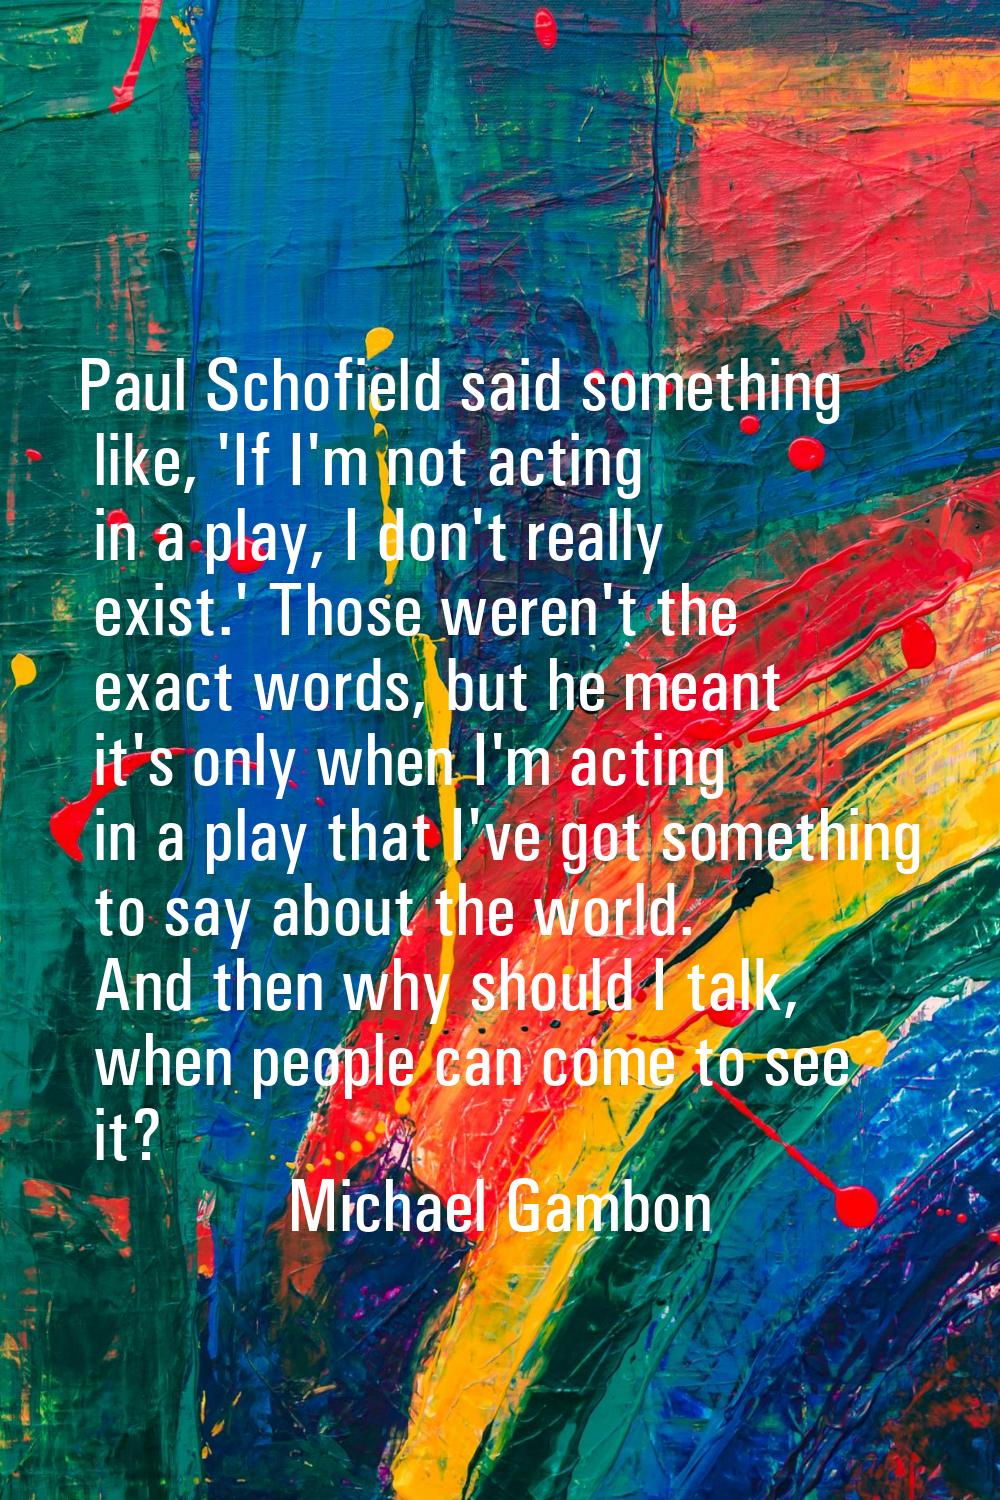 Paul Schofield said something like, 'If I'm not acting in a play, I don't really exist.' Those were